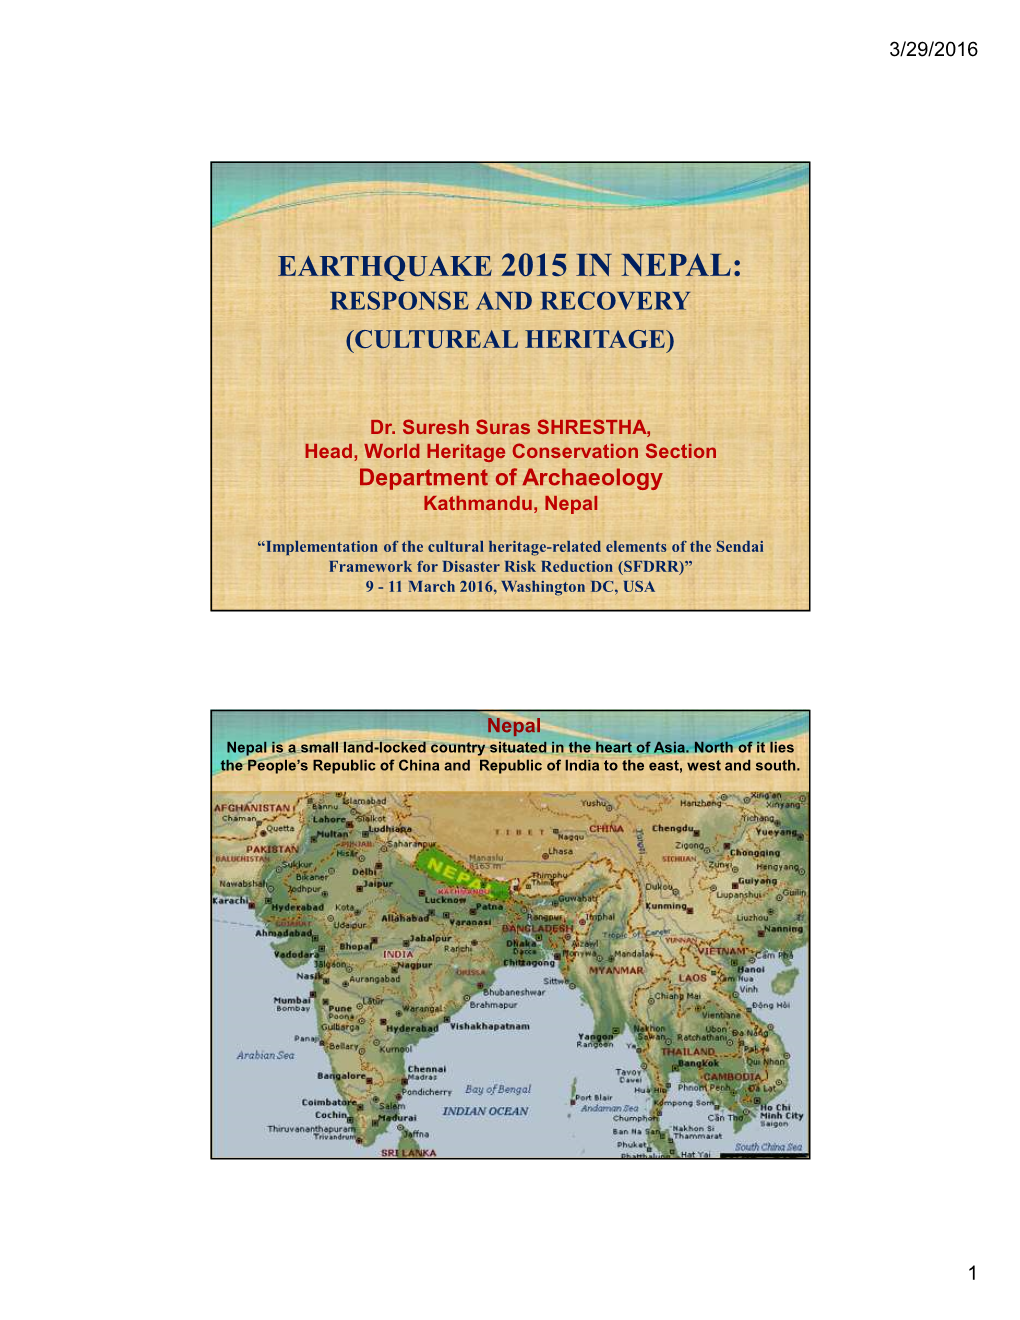 Earthquake 2015 in Nepal: Response and Recovery (Cultural Heritage)